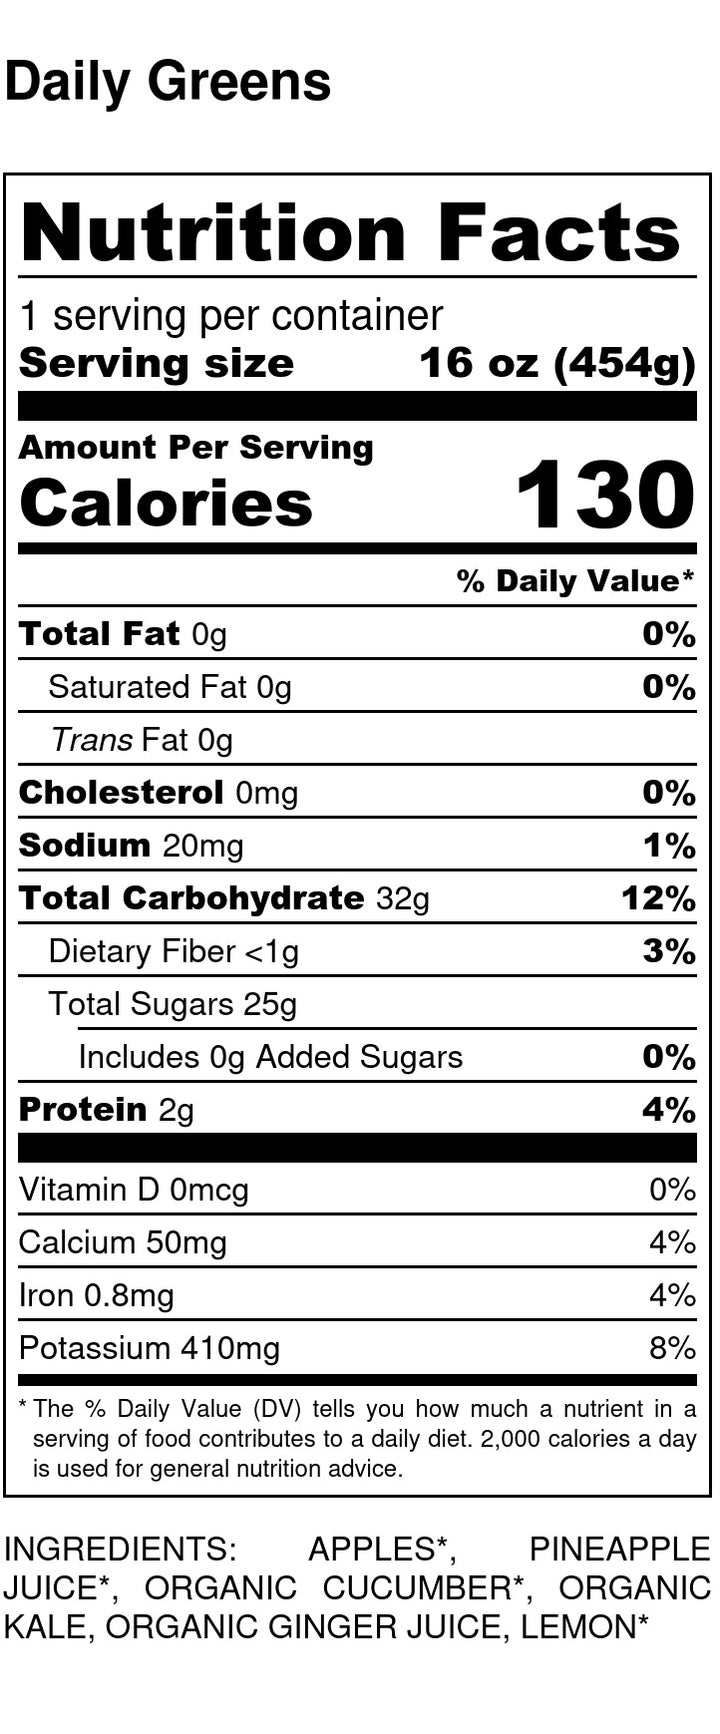 Daily Greens Nutritional Facts